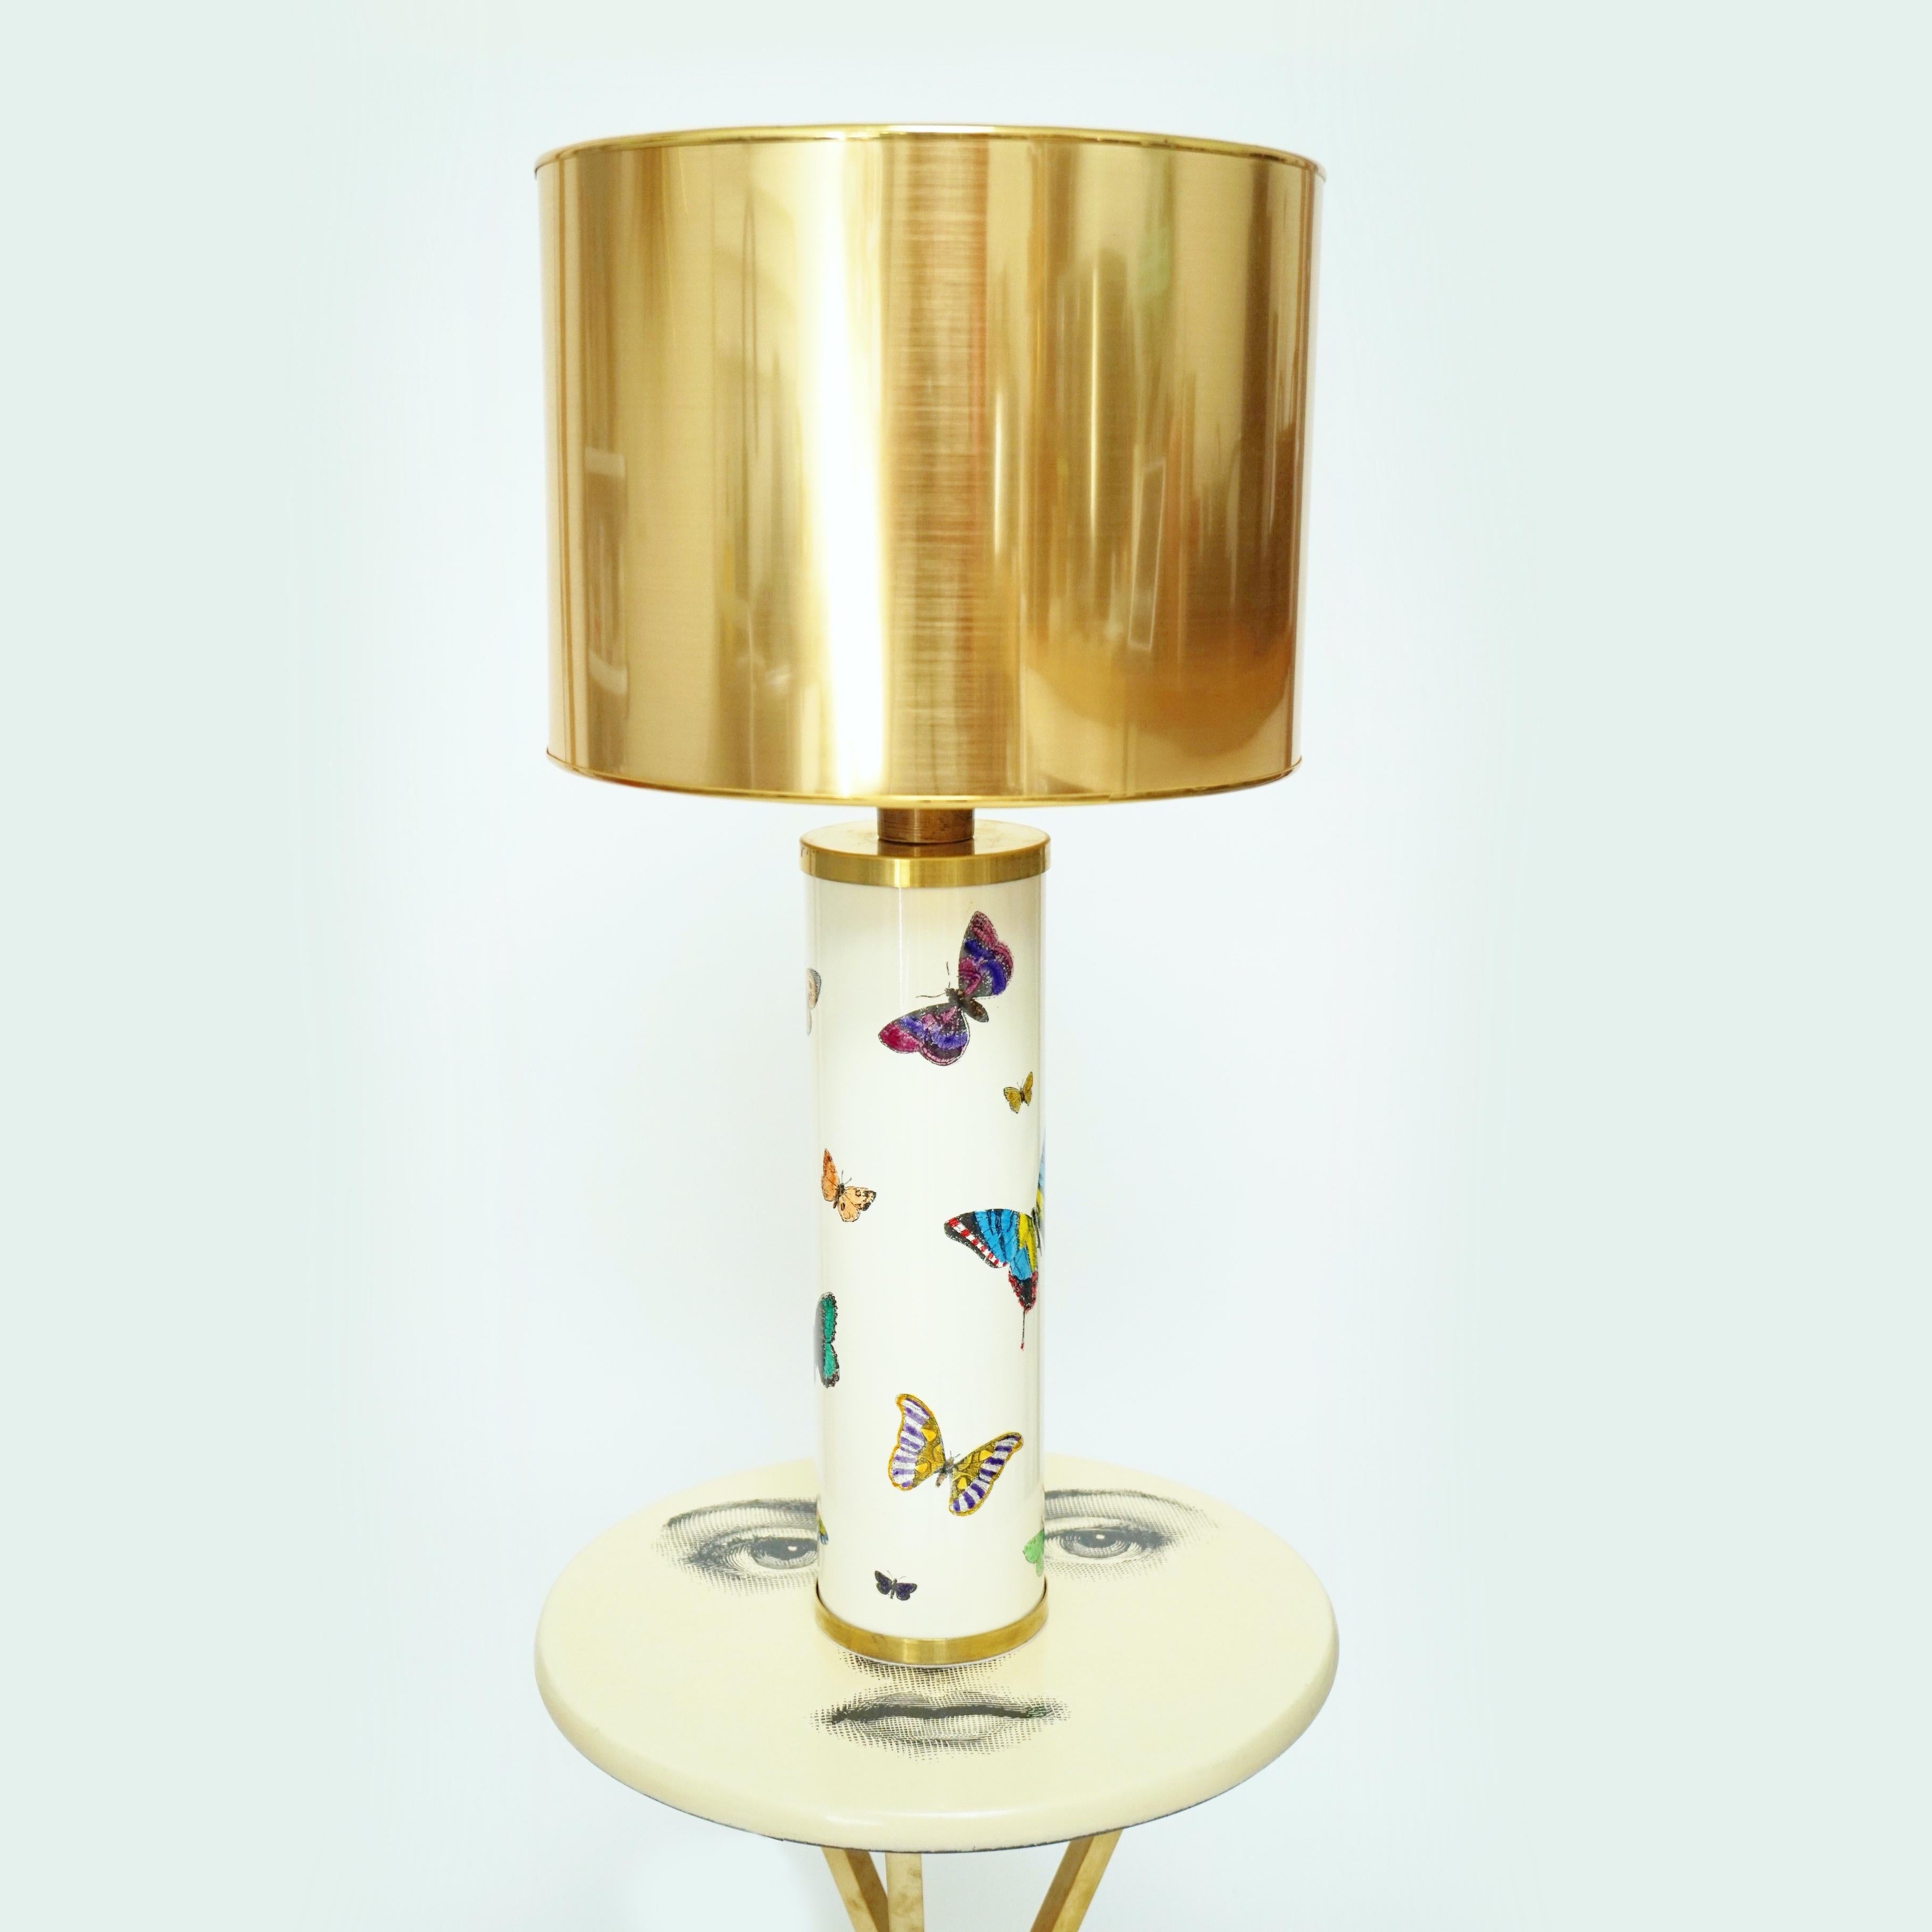 - Vintage lamp base by collectible and coveted Italian designer Piero Fornasetti
- Whimsical 